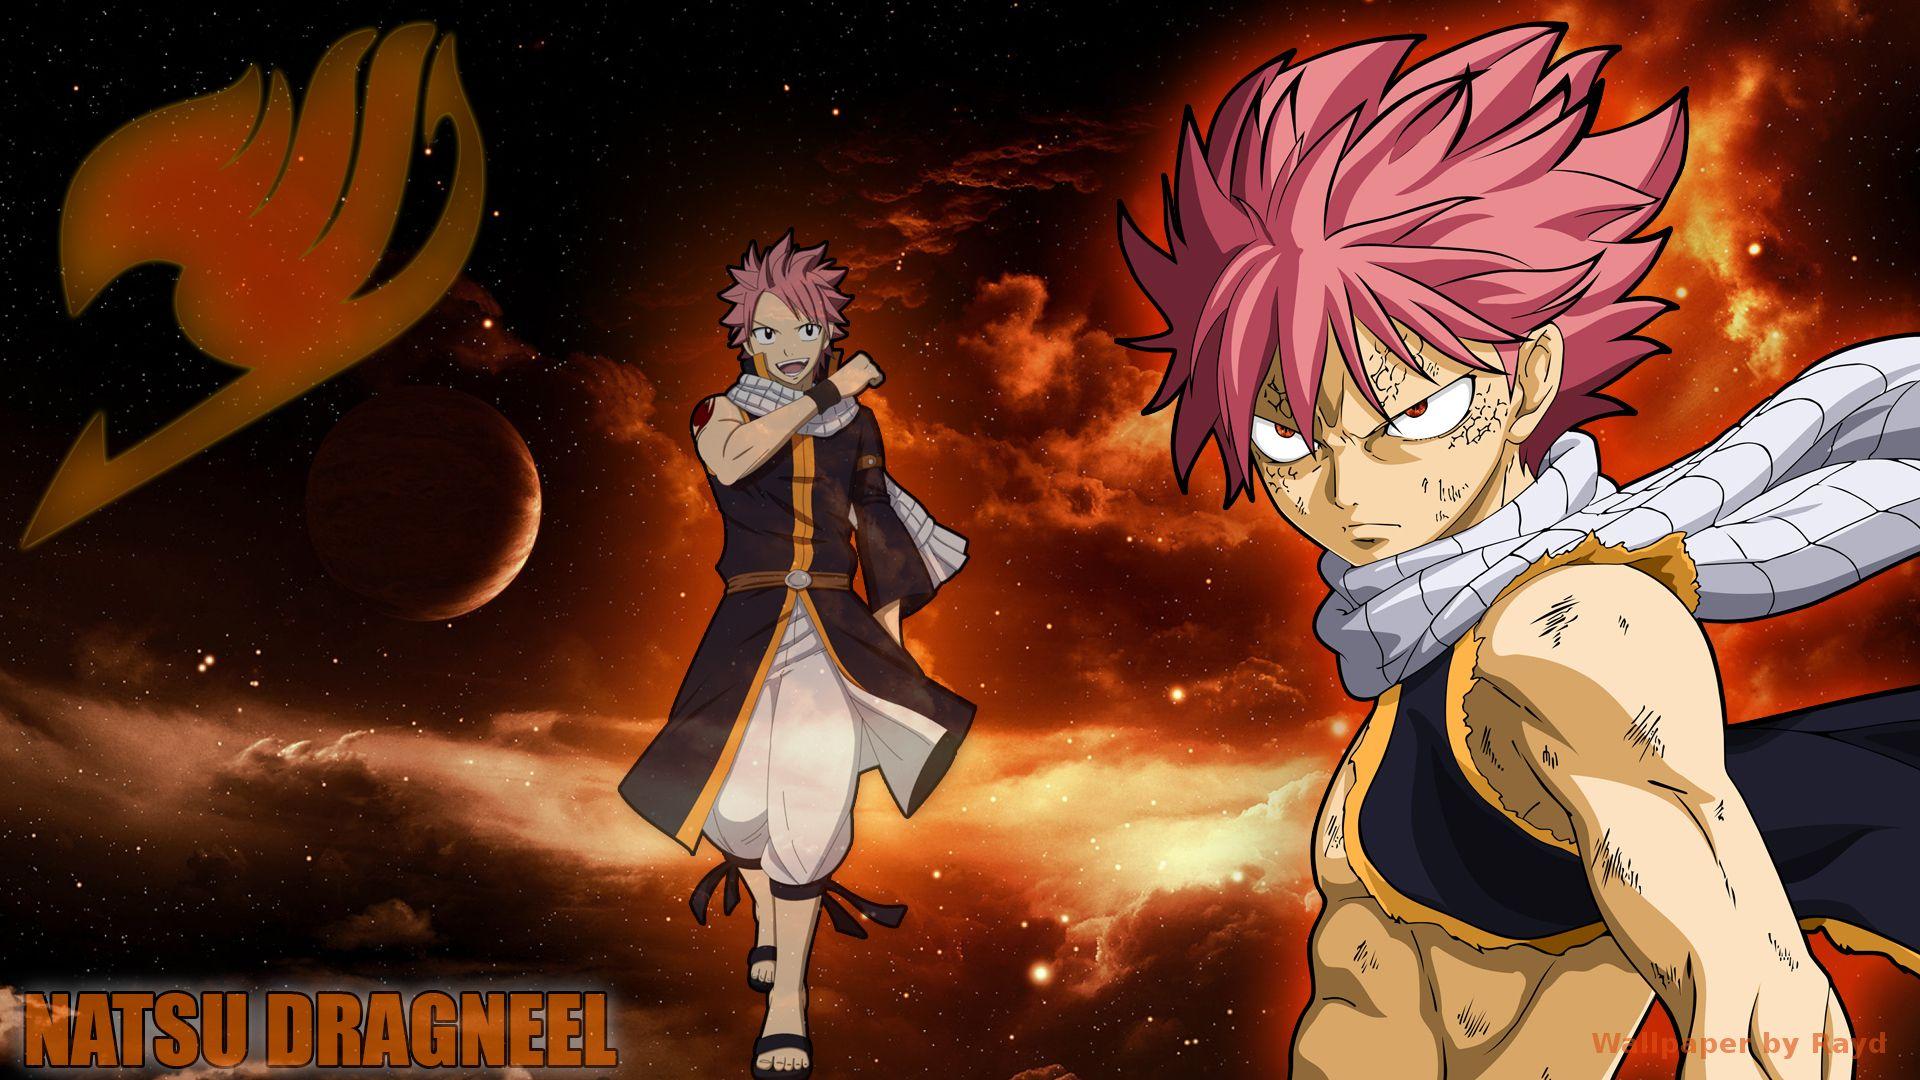 Anime Fairy Tail Natsu Dragneel Wallpapers.